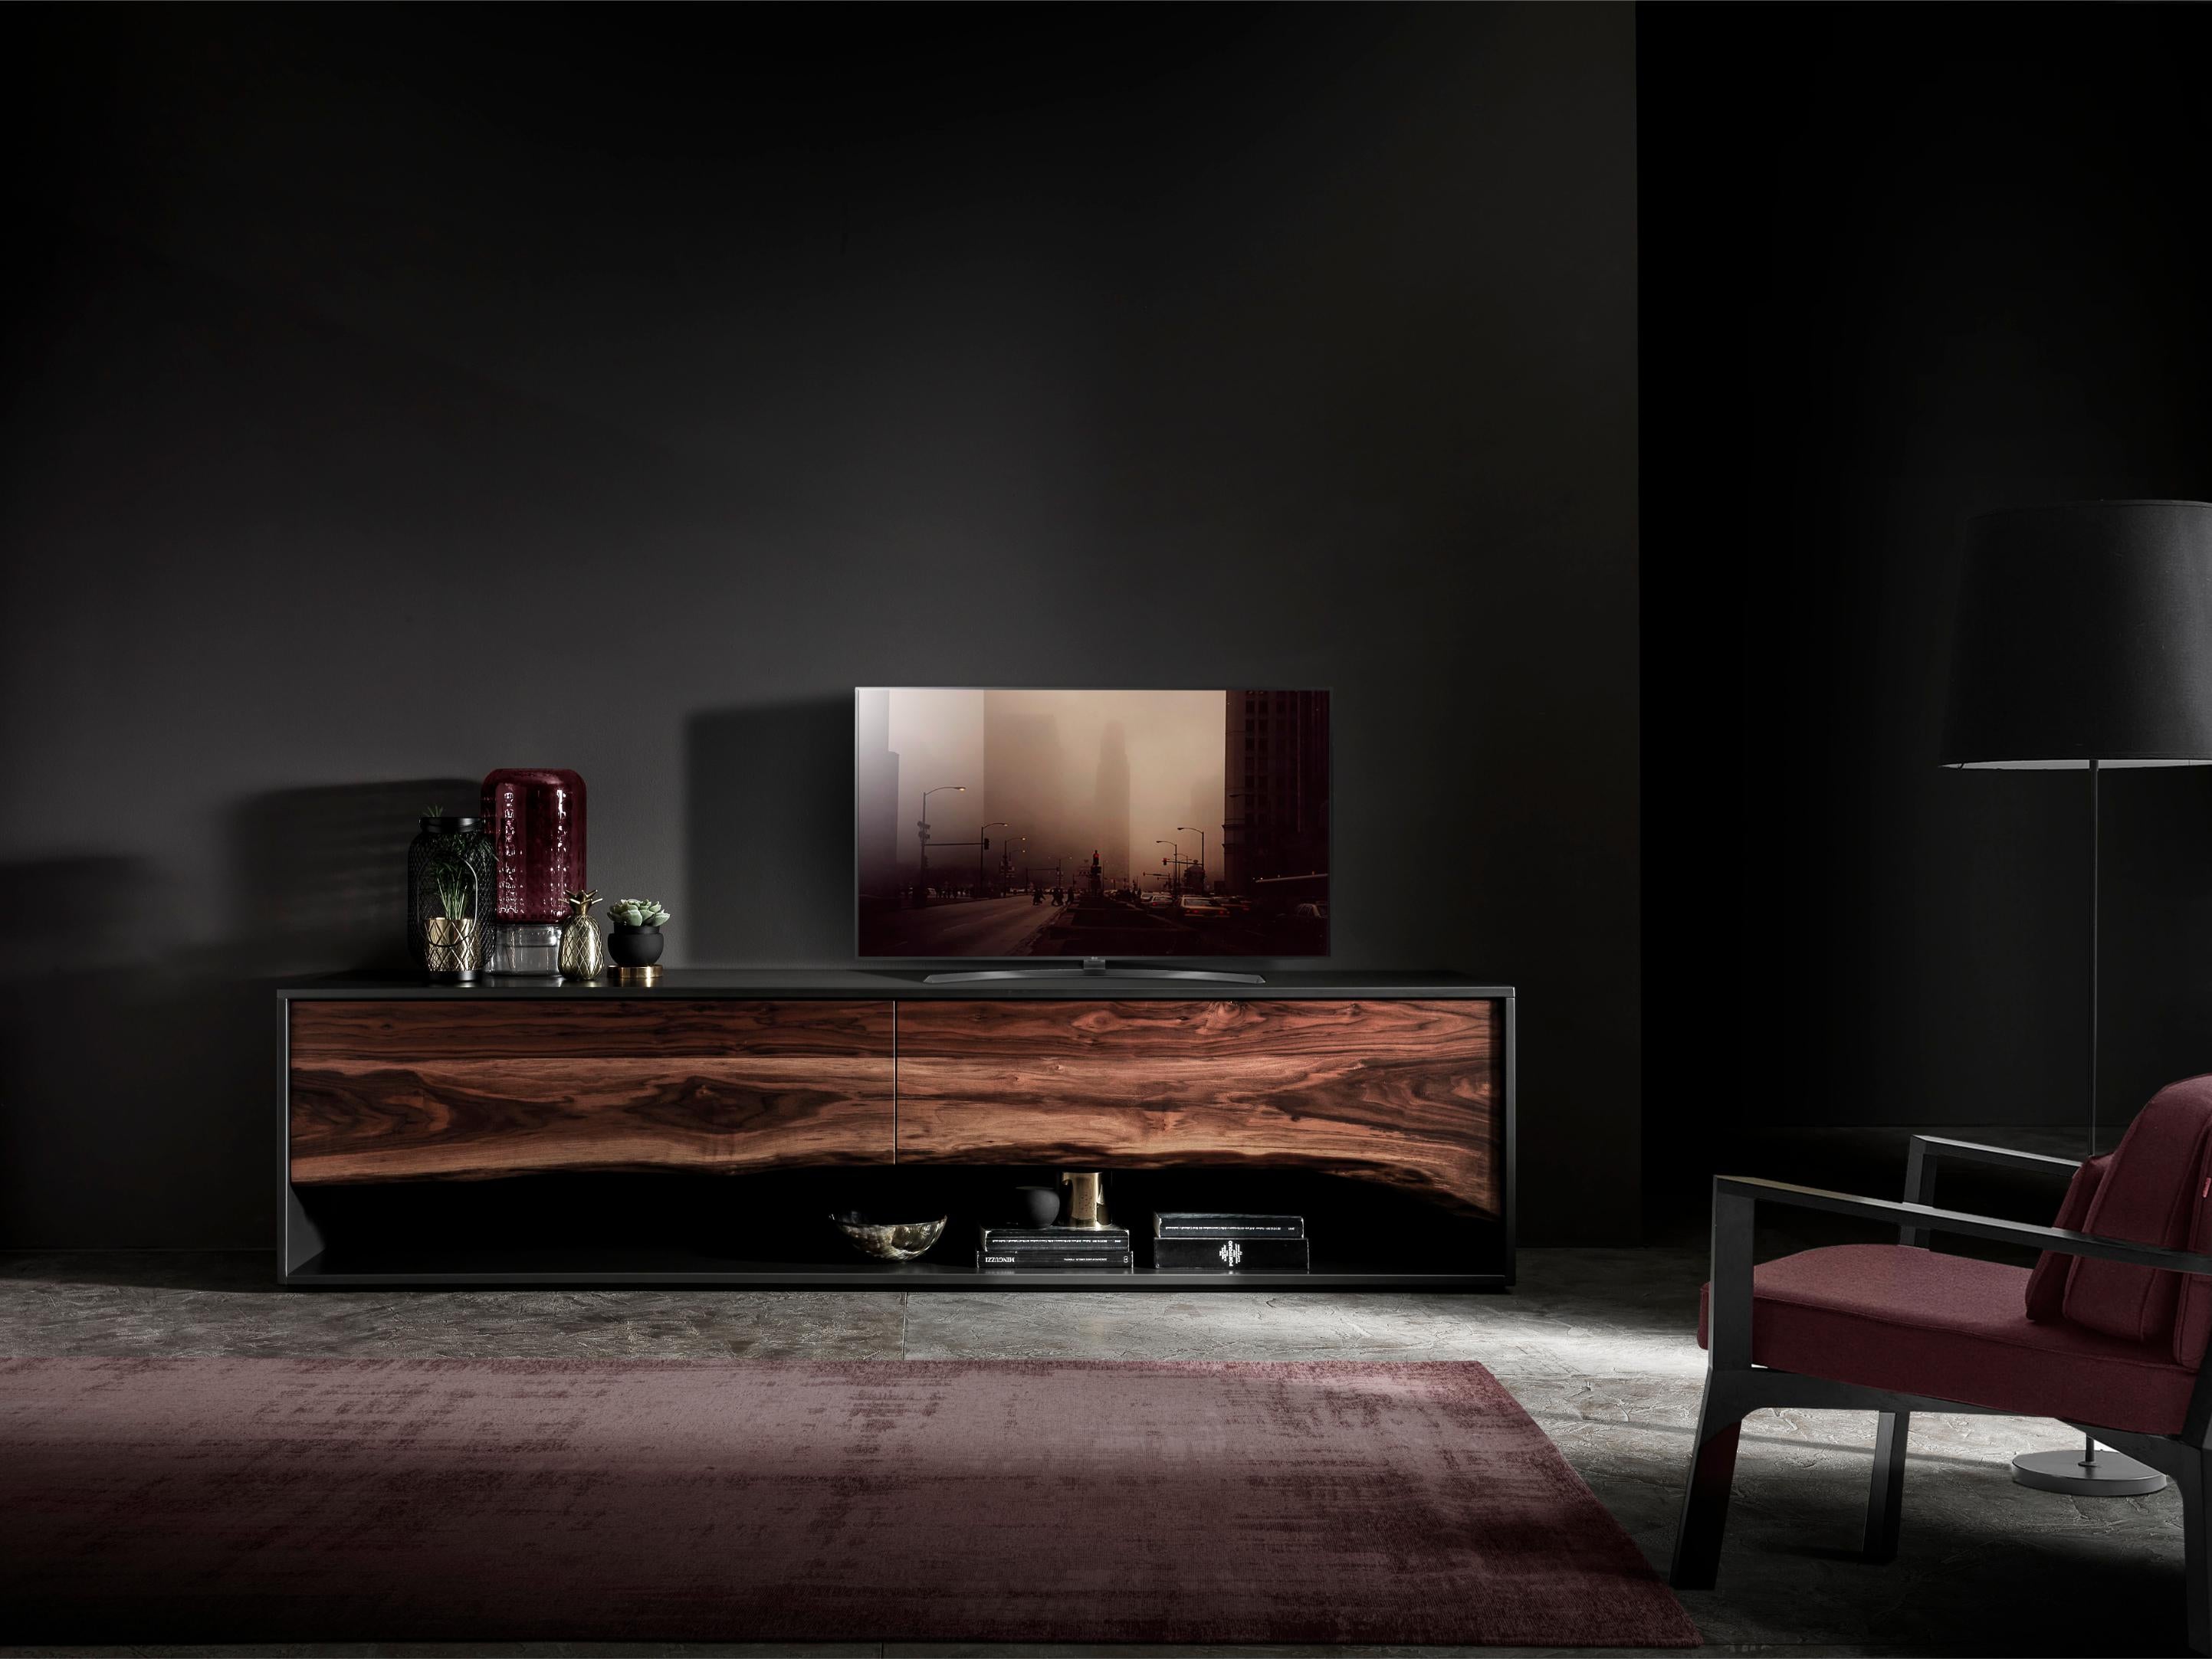 Blackbird Low Drawers Cabinet by Francesco Profili
Dimensions: W 250 x D 50 x H 55 cm 
Materials: Walnut, LEDs.

The cabinet fully reflects the collection core concepts. The essence and nobility of the wood is married with the lacquered look,